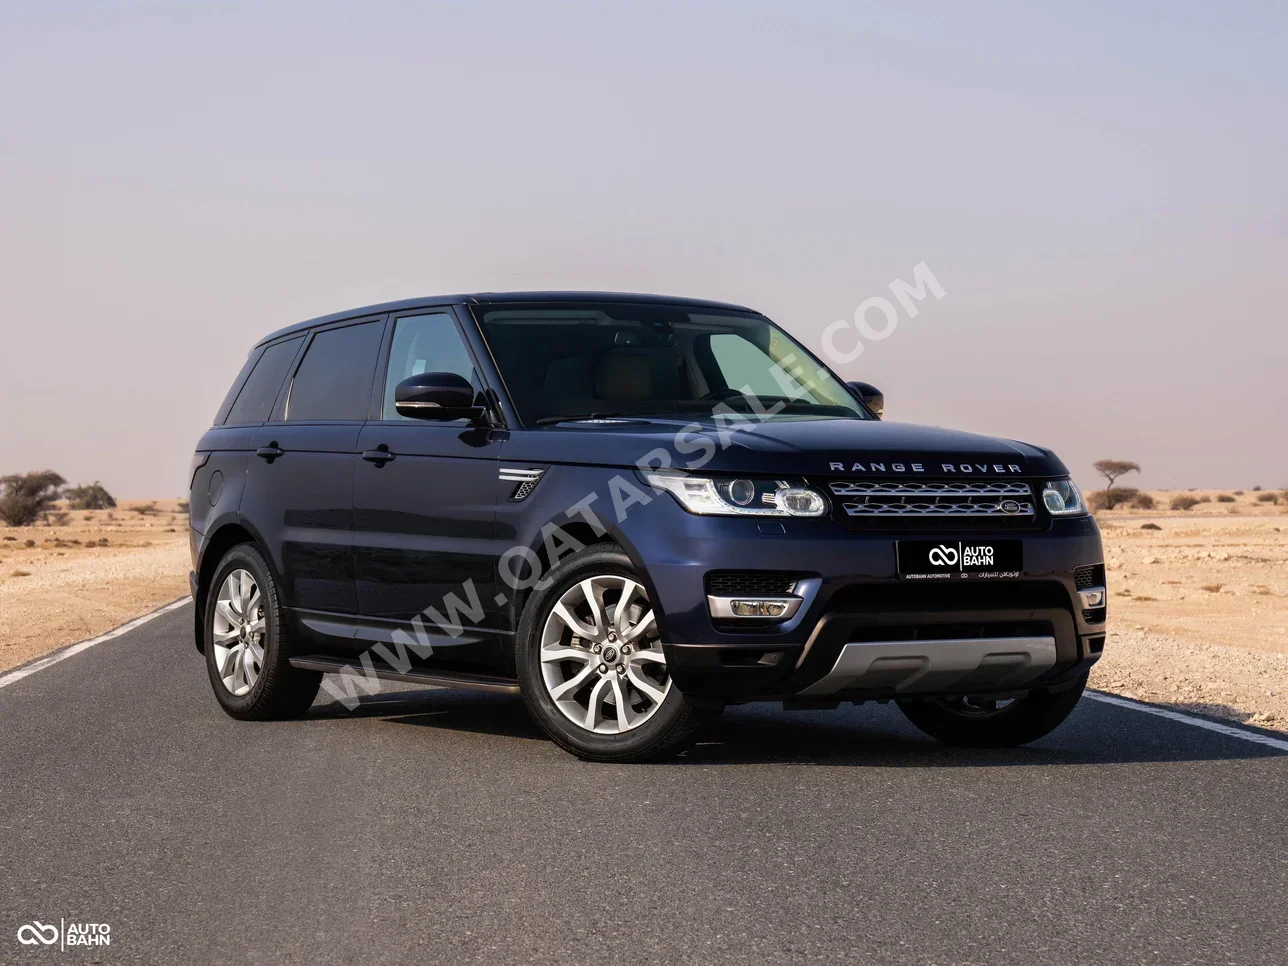 Land Rover  Range Rover  Sport HSE  2014  Automatic  163,000 Km  6 Cylinder  All Wheel Drive (AWD)  SUV  Blue